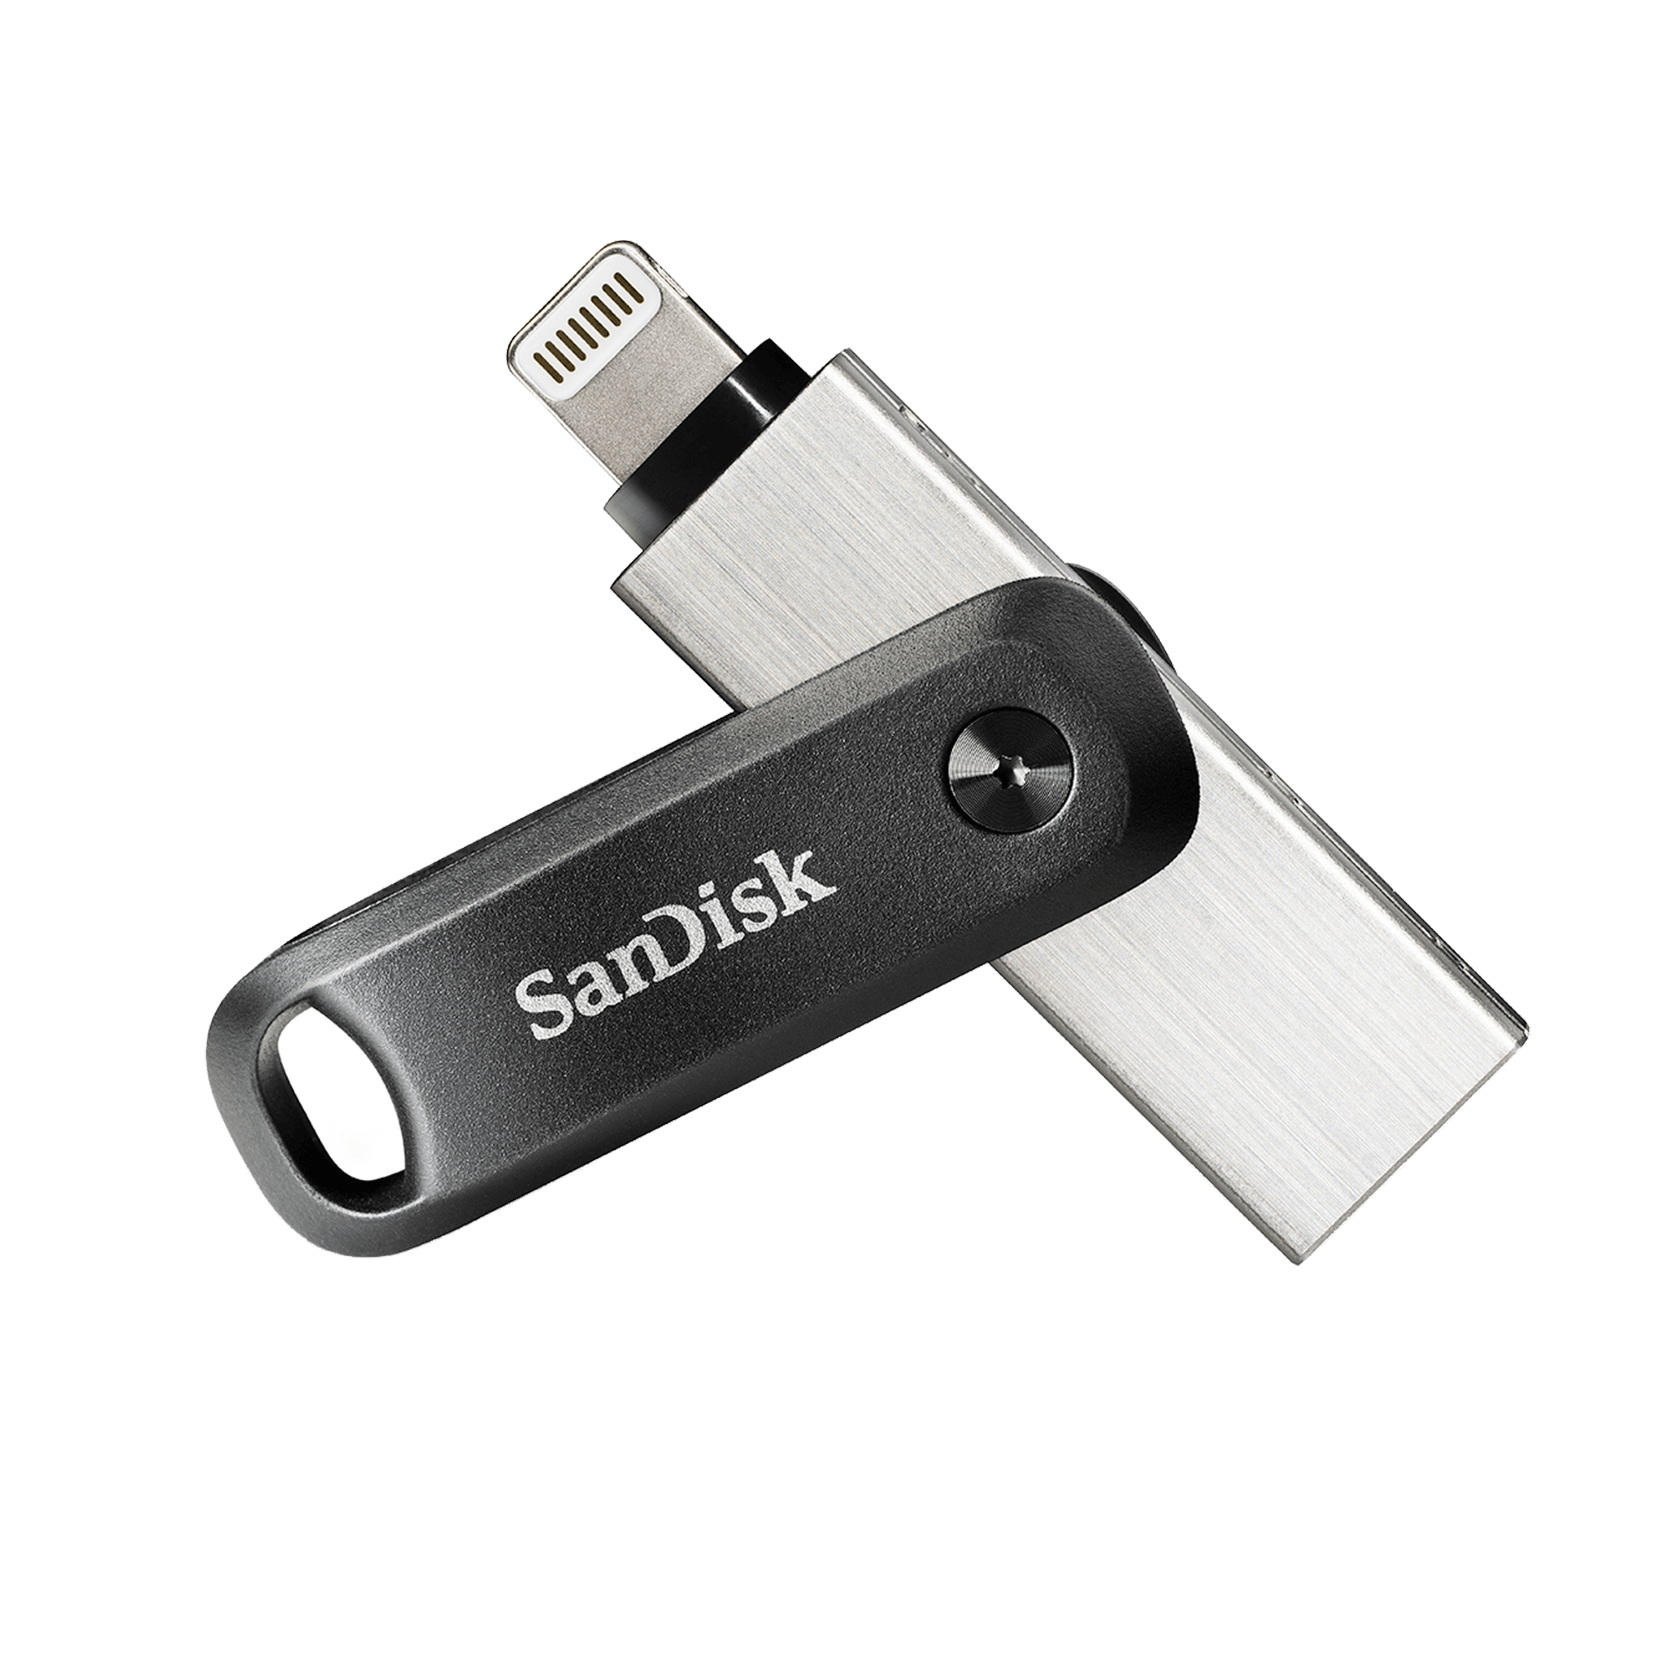 SanDisk 256GB iXpand Flash Drive Go, for iPhone and iPad - SDIX60N-256G-GN6NE - image 1 of 8